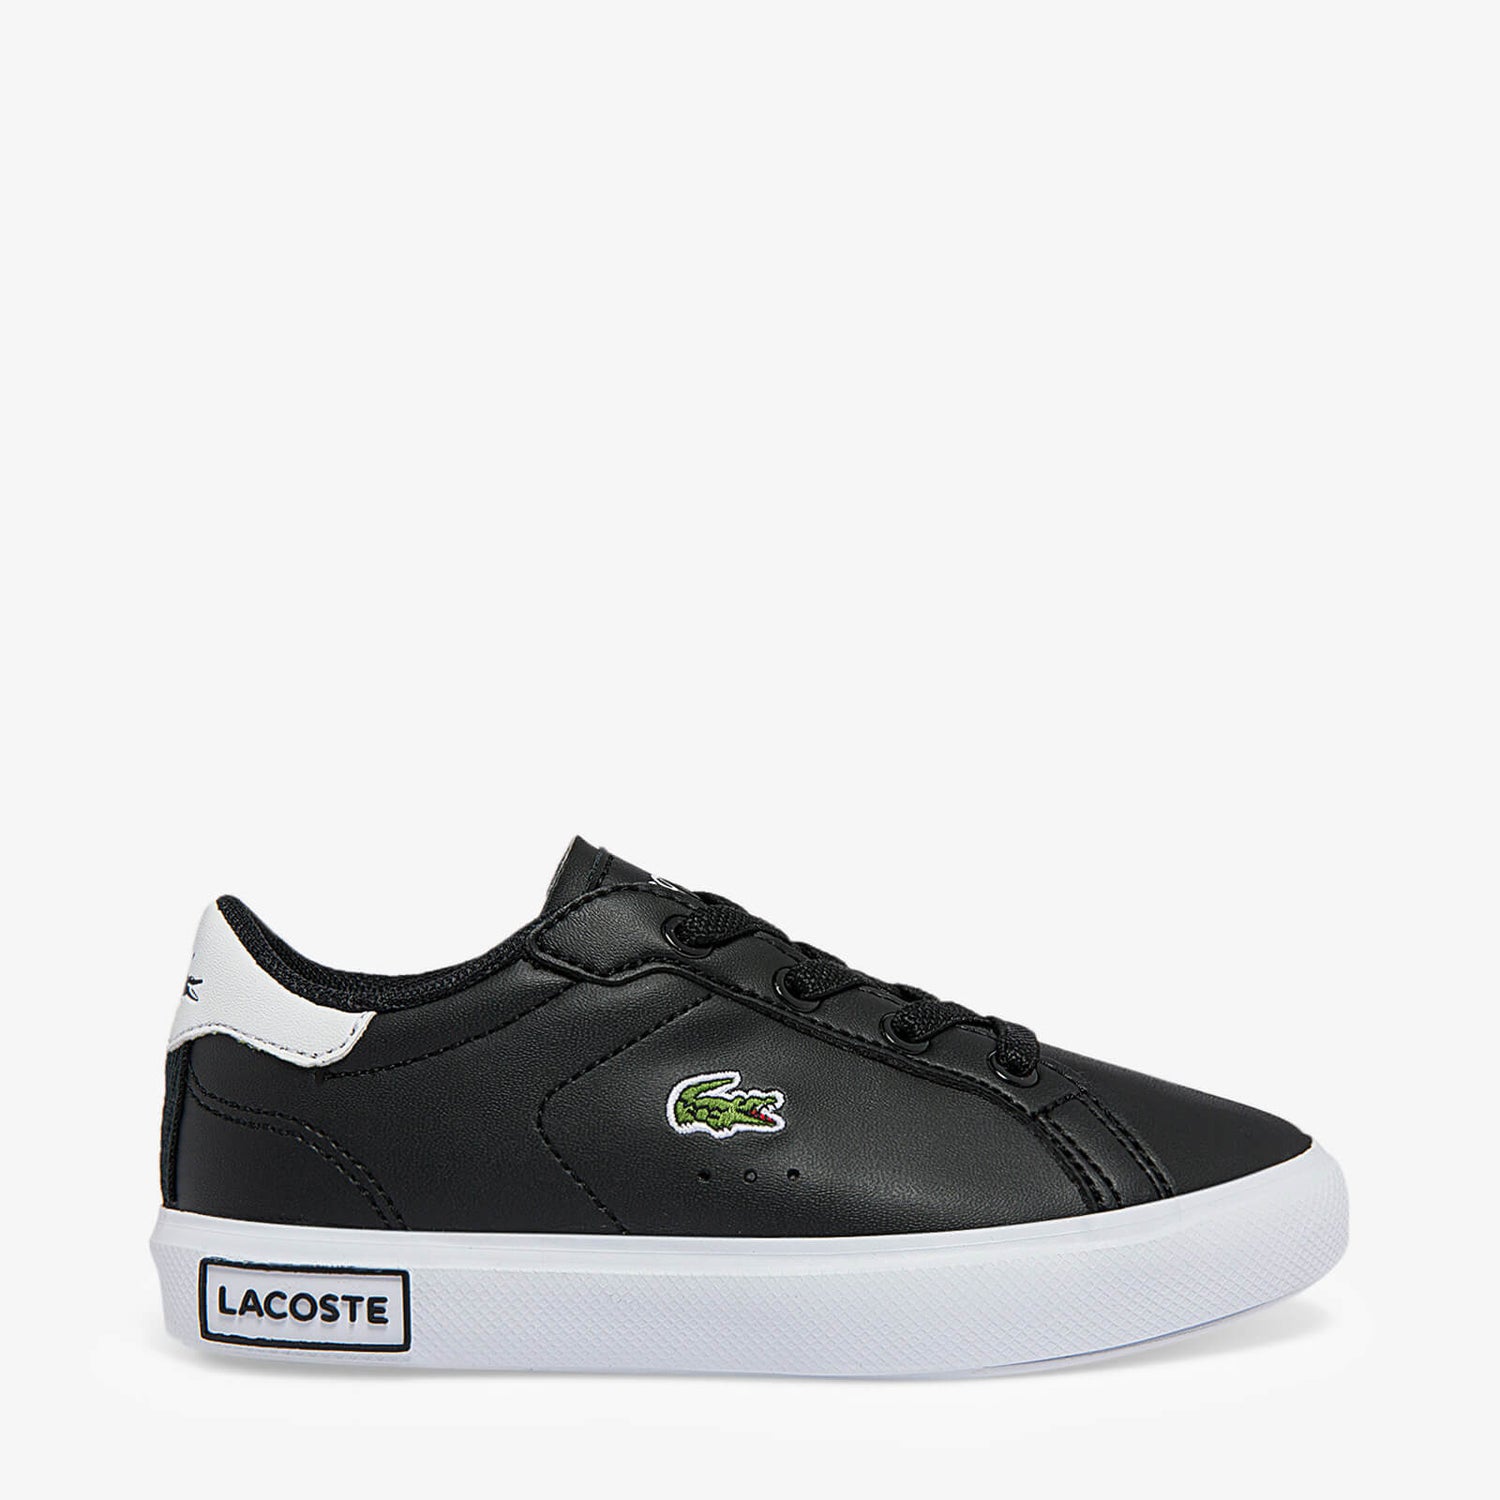 Lacoste Infant Powercourt Trainers - Black - UK 5 Toddler